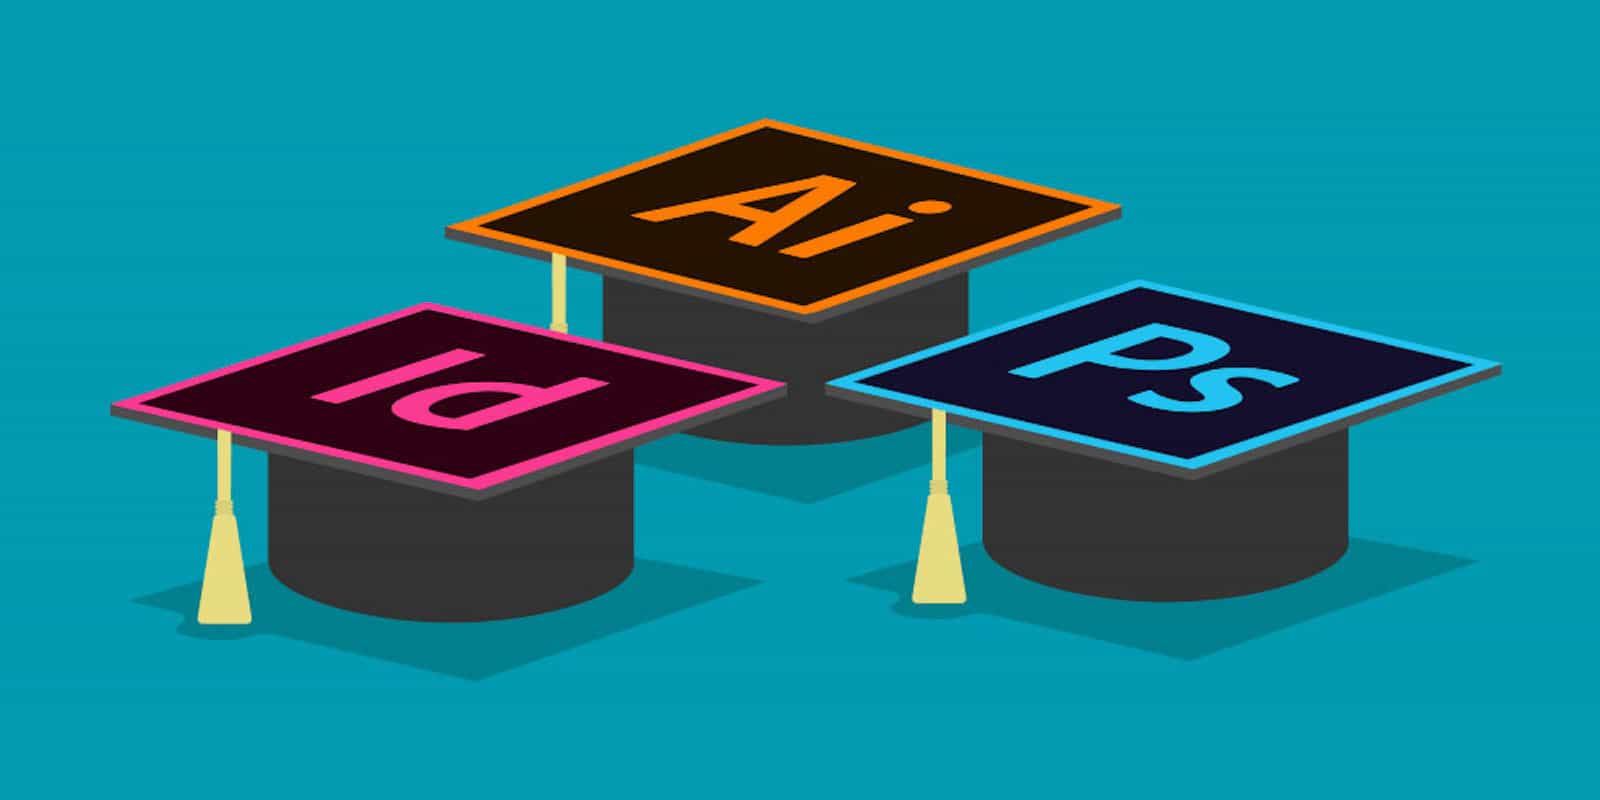 This trio of courses will adds Photoshop, InDesign, and Illustrator to your resume.